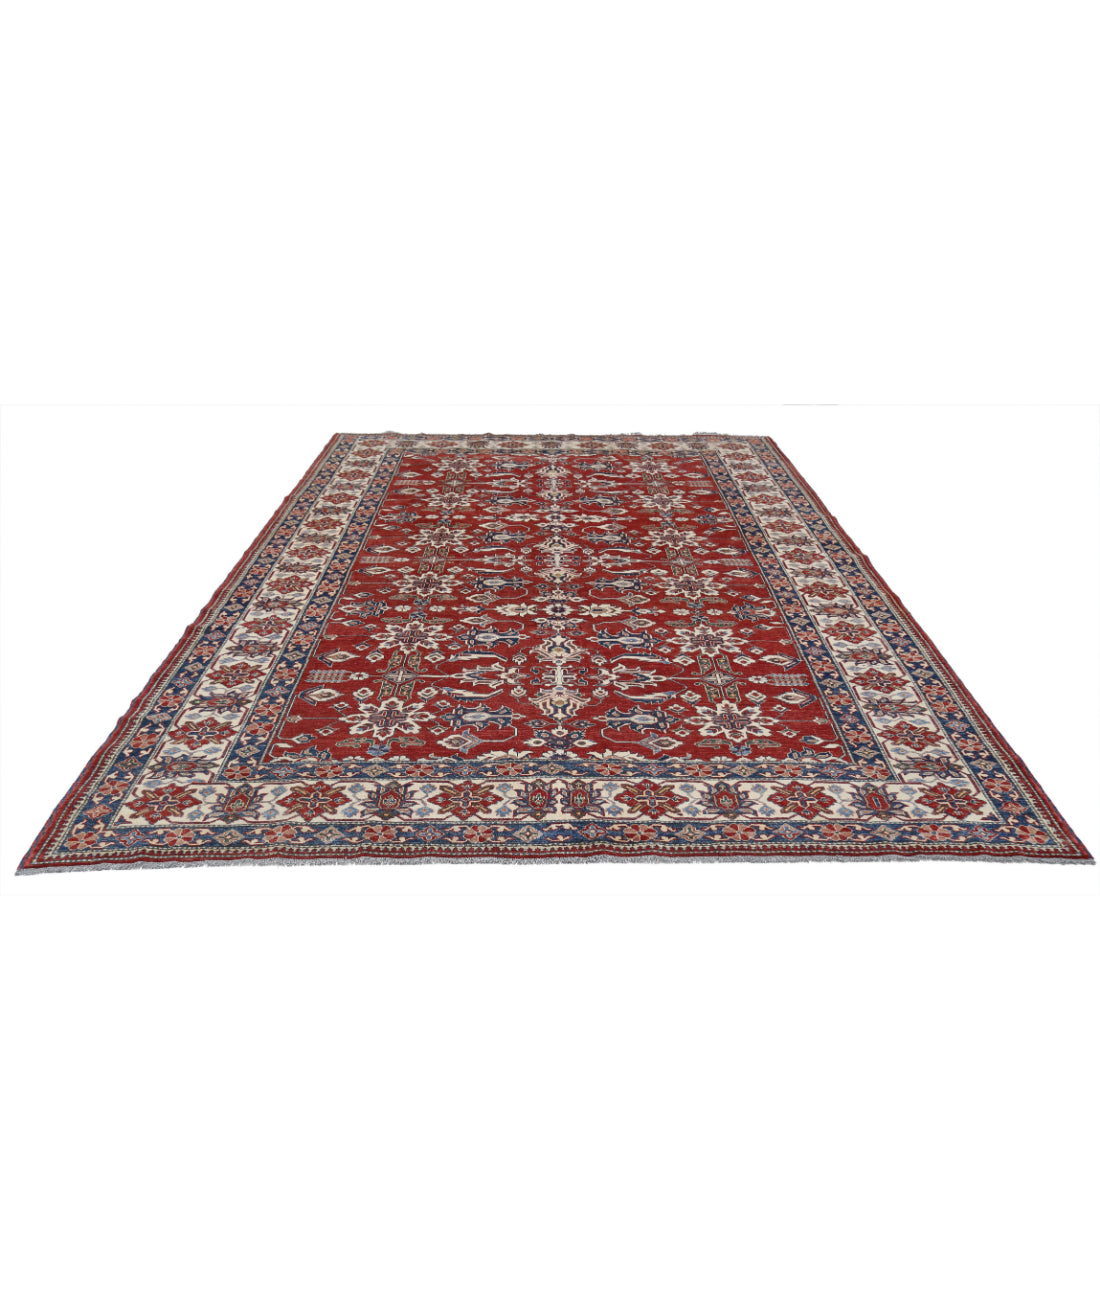 Hand Knotted Royal Kazak Wool Rug - 8'4'' x 11'8'' 8'4'' x 11'8'' (250 X 350) / Red / Ivory